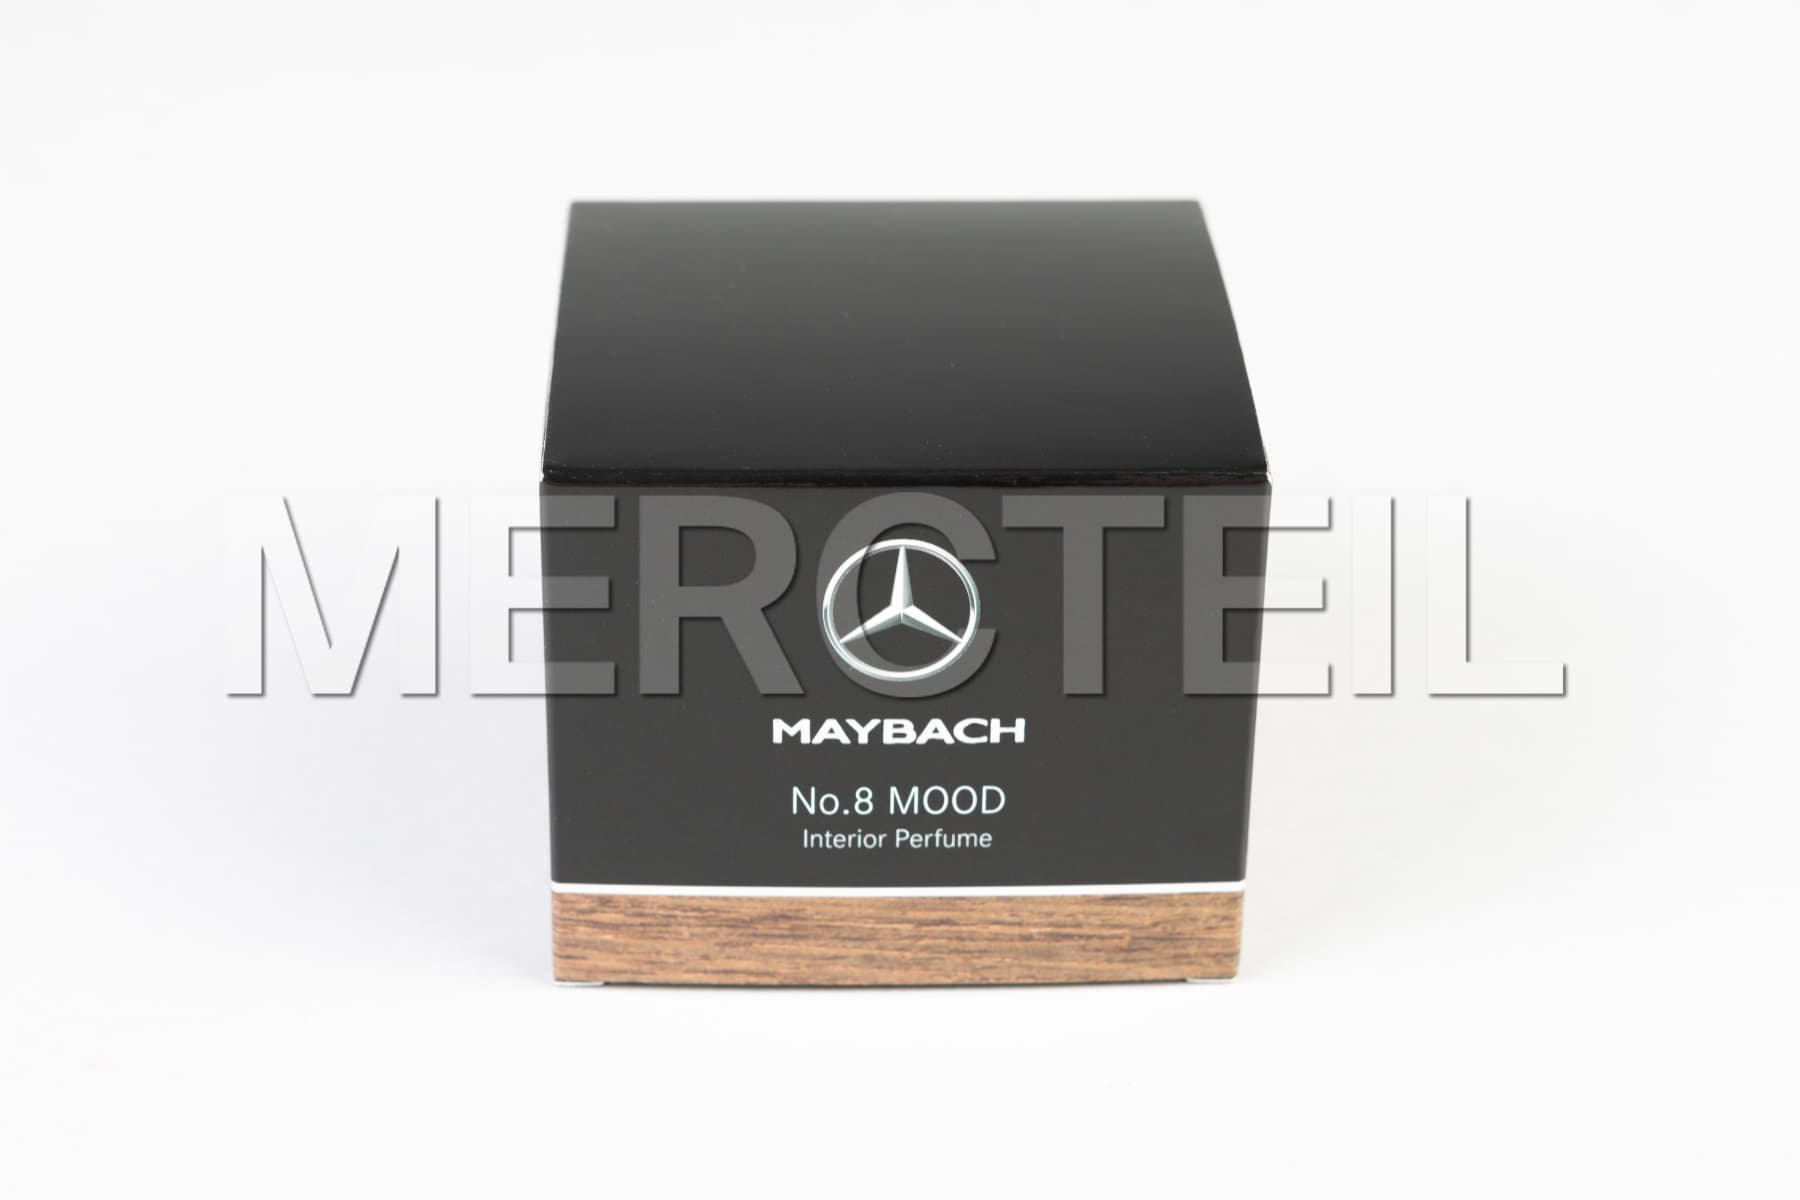 Fragrance Maybach Air Balance No 8 Mood Genuine Mercedes Benz (part number: A1678992200)